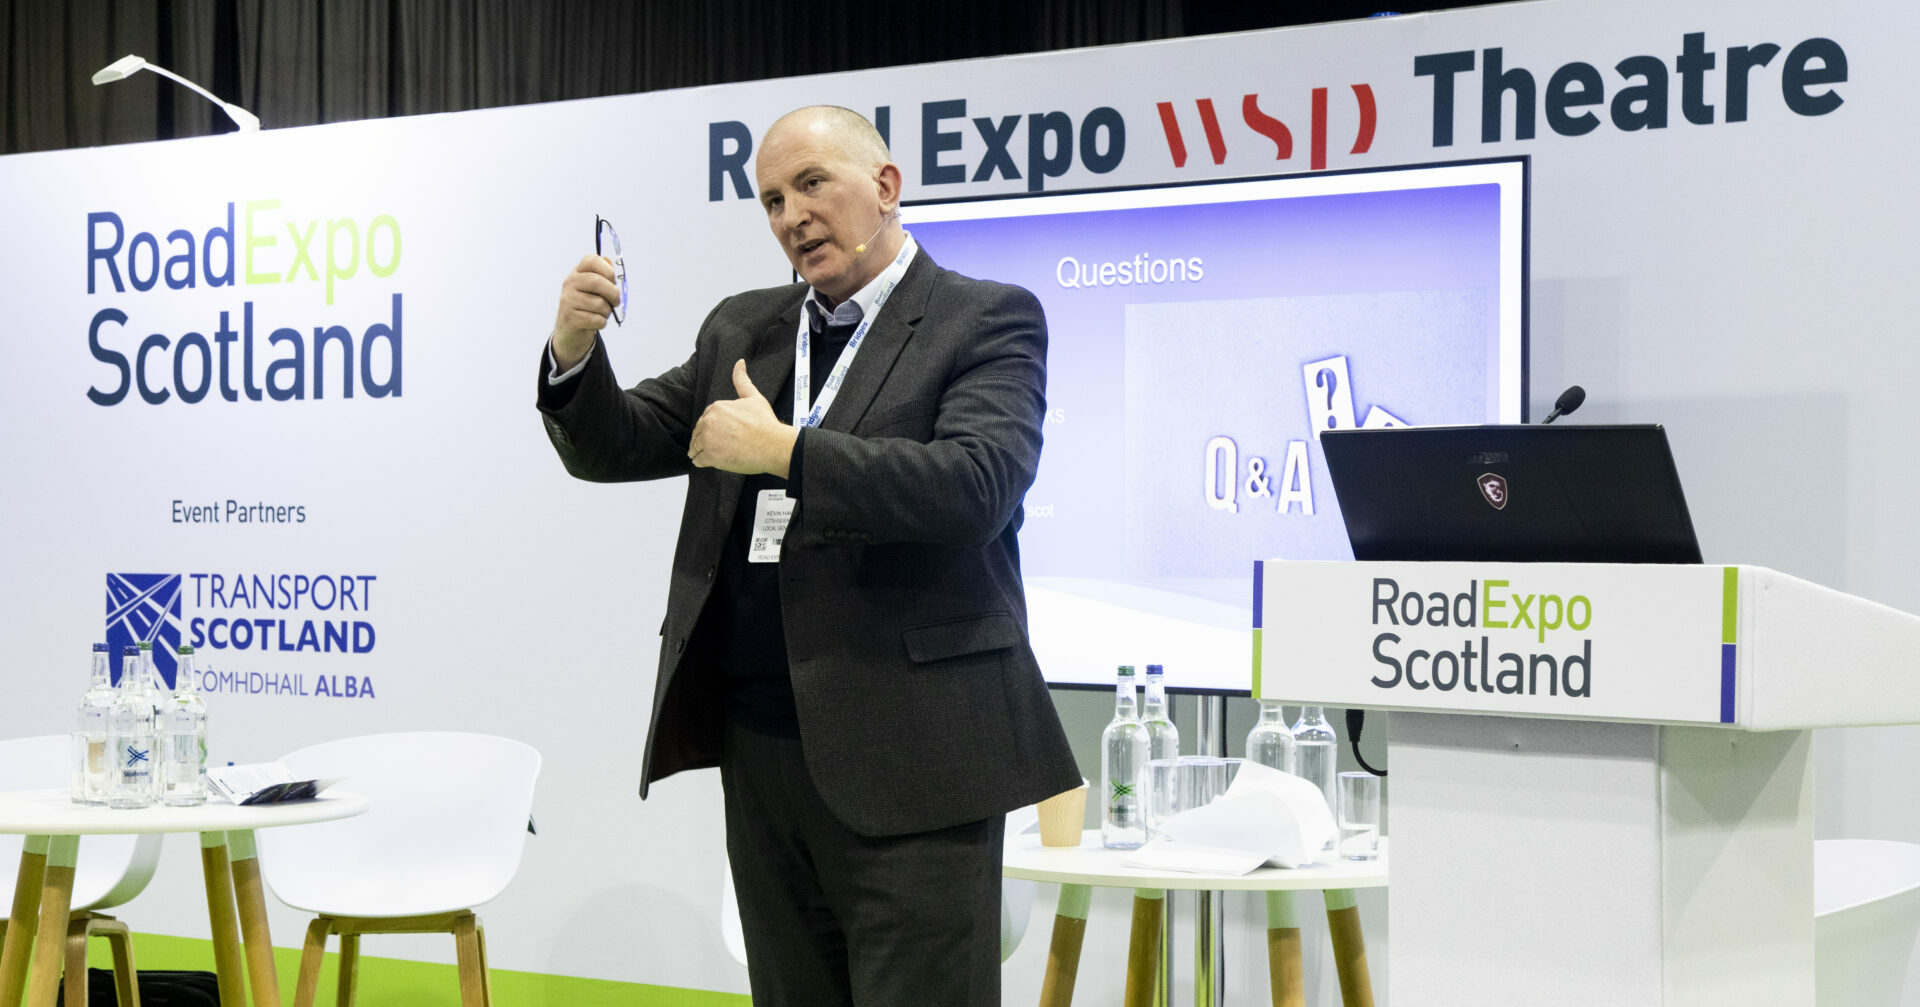 Road Expo Rounds off Re-flow’s Year on the Road